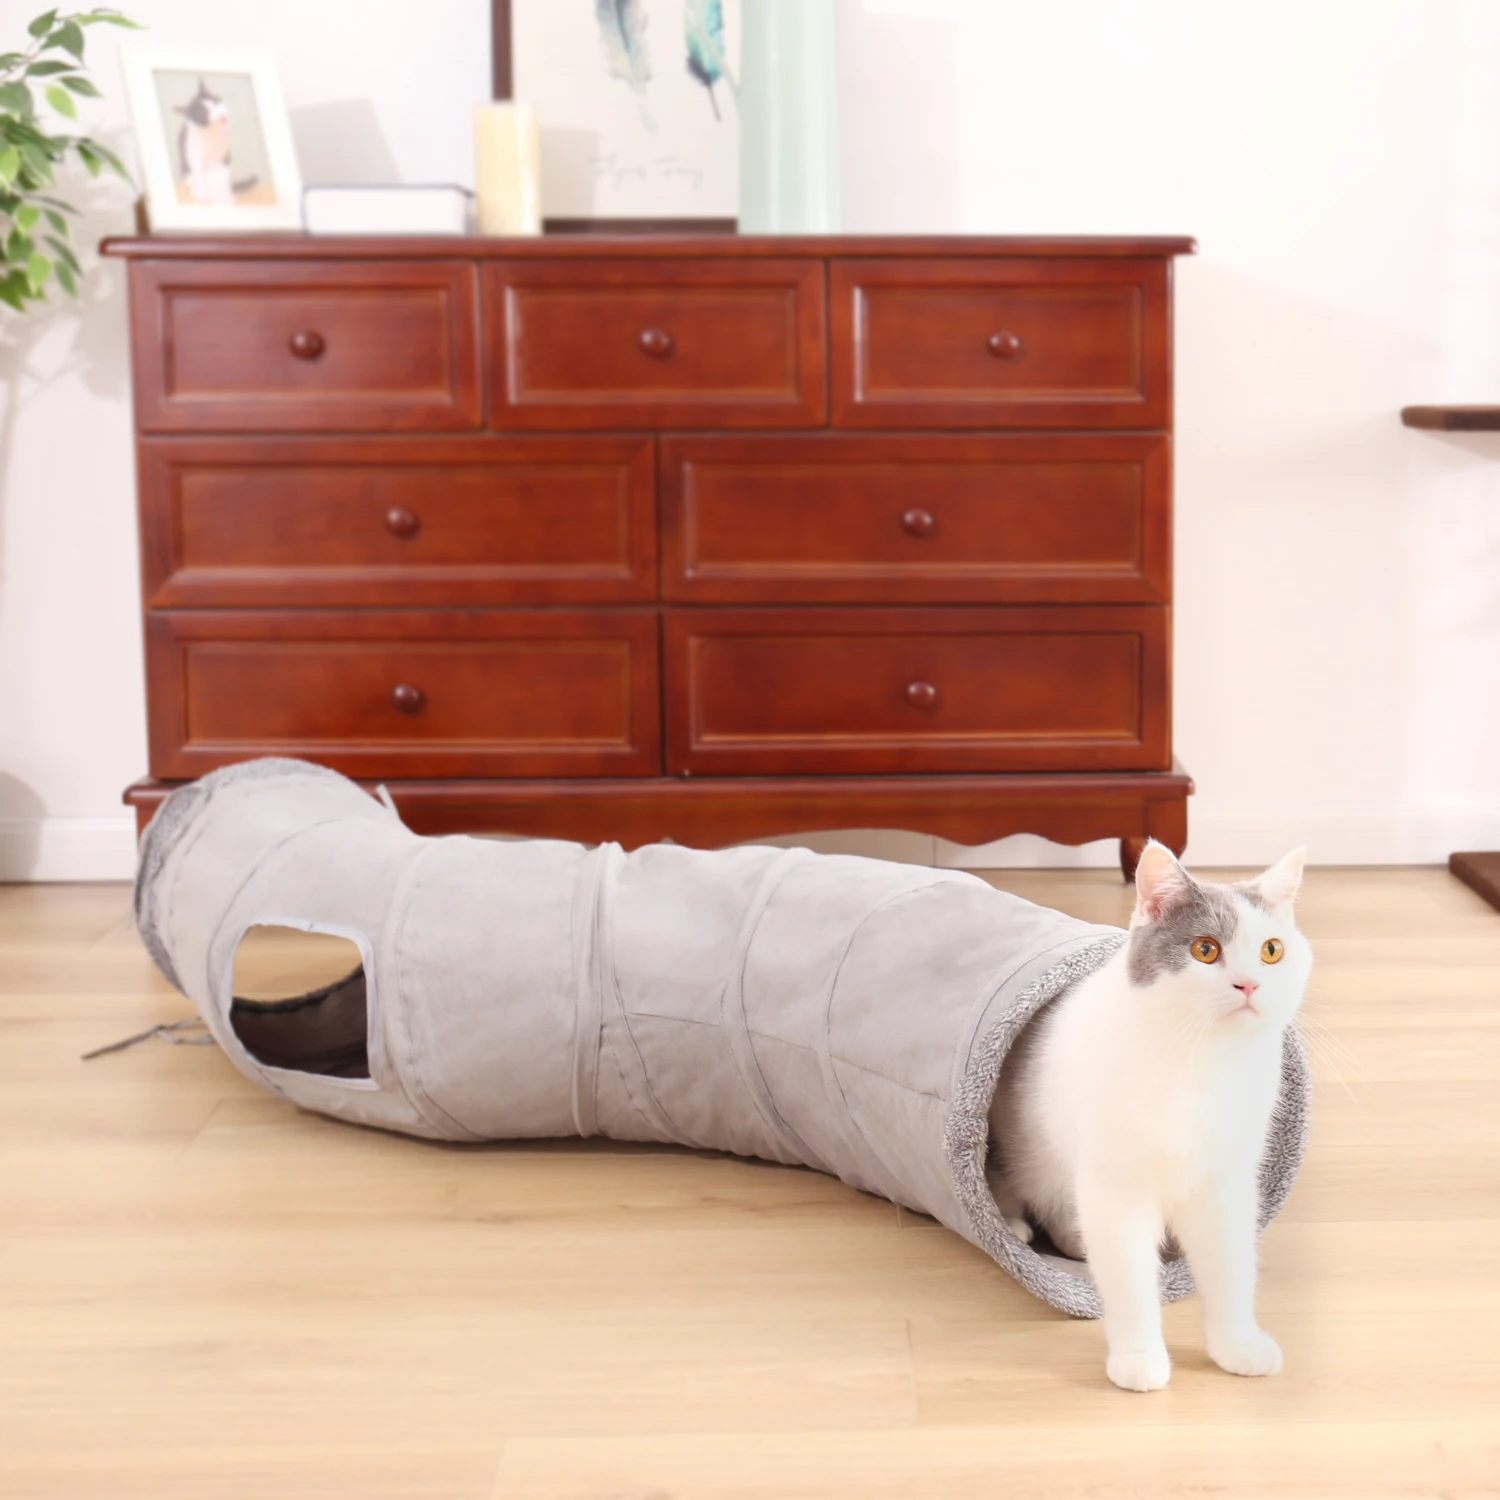 Details about   Collapsible Tunnel Curved Channel With Peekaboo Holes Fun For Cats Rabbit Ferret 